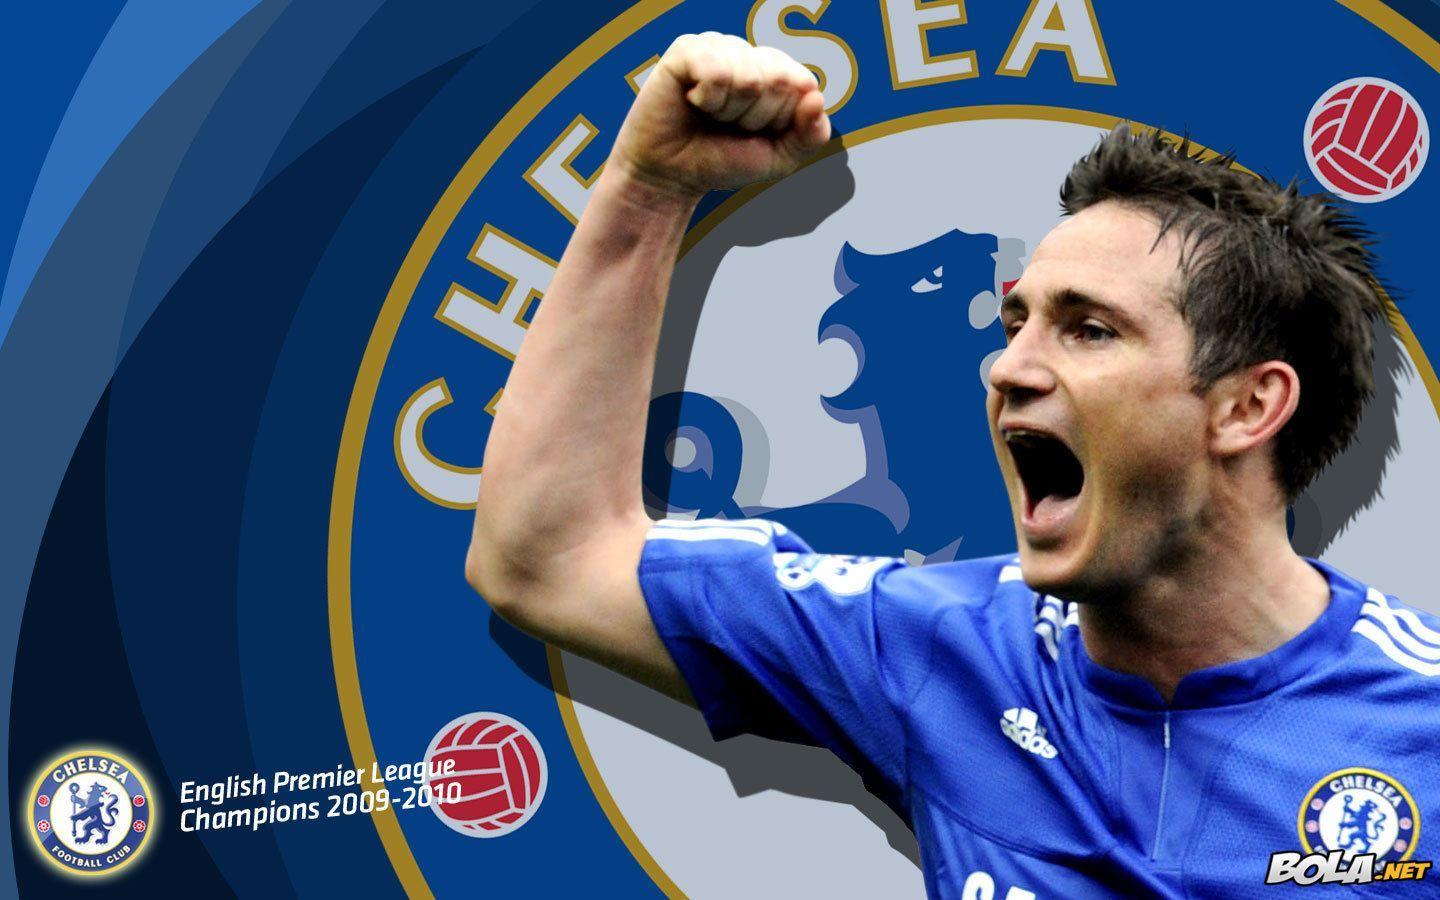 Frank Lampard's Top 10 goals for Chelsea